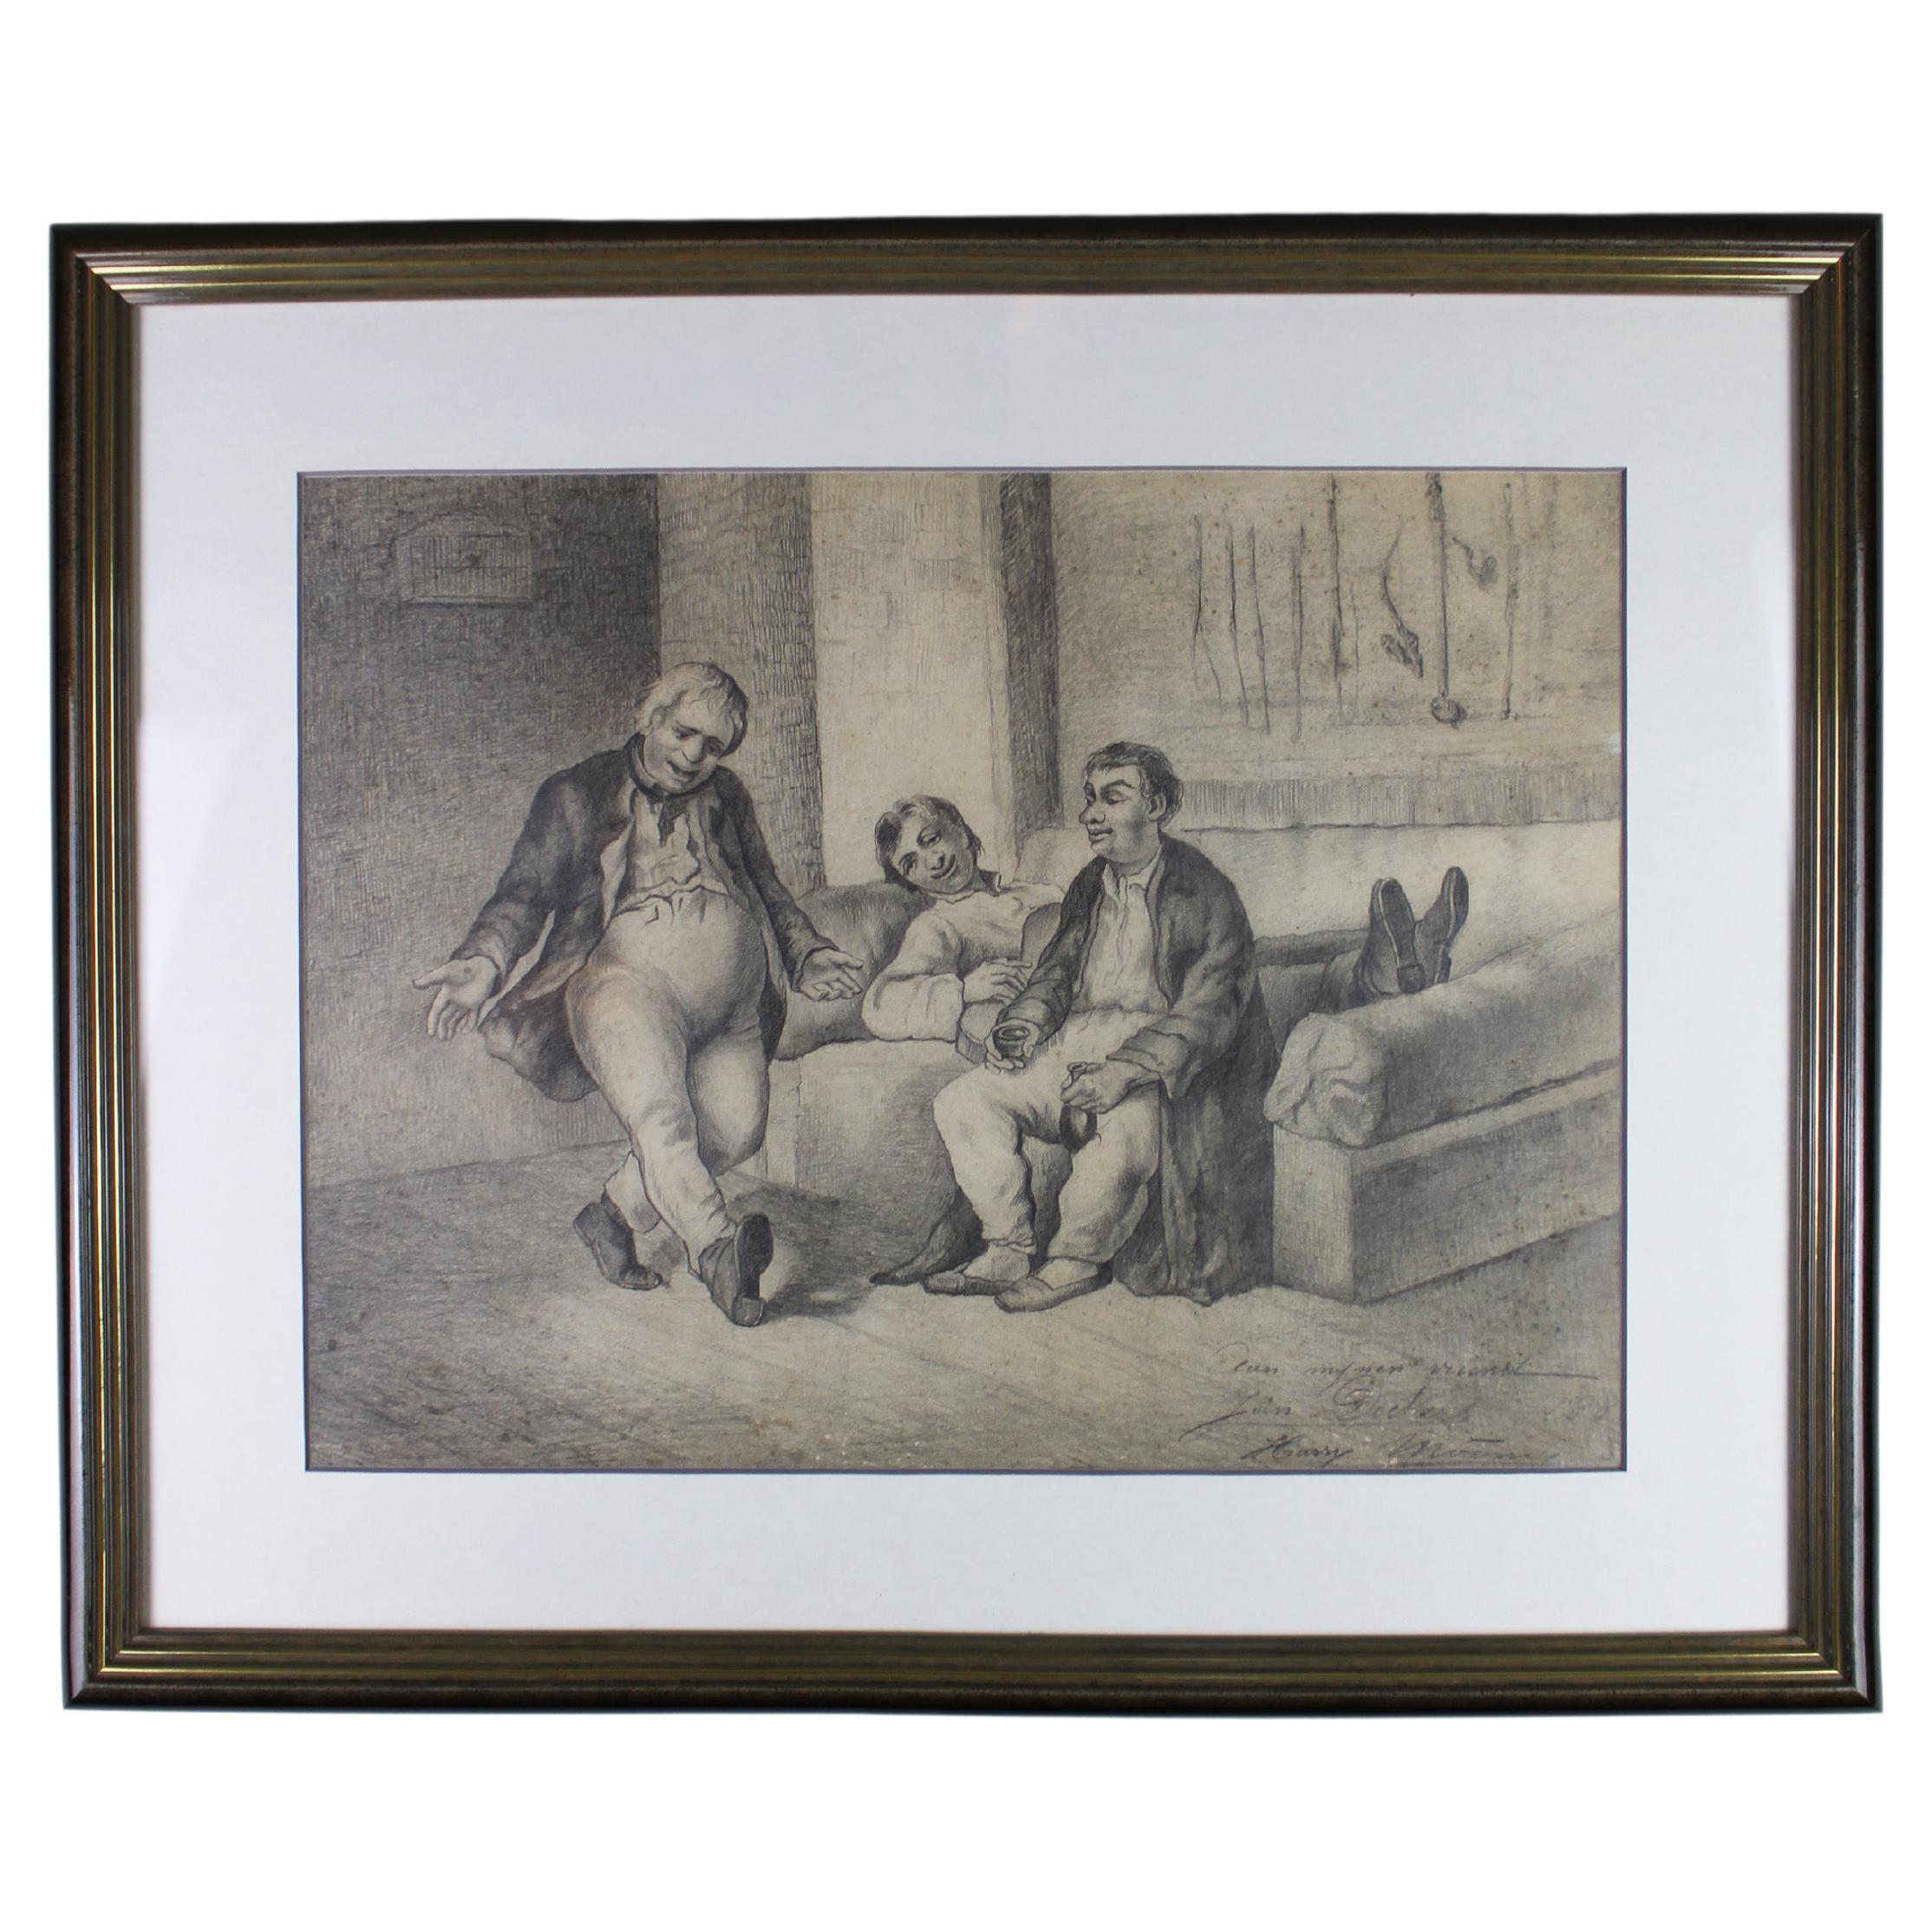 19th Century Charcoal Drawing "3 cheerful men" Signed Jan Deckers 1885 Belgium